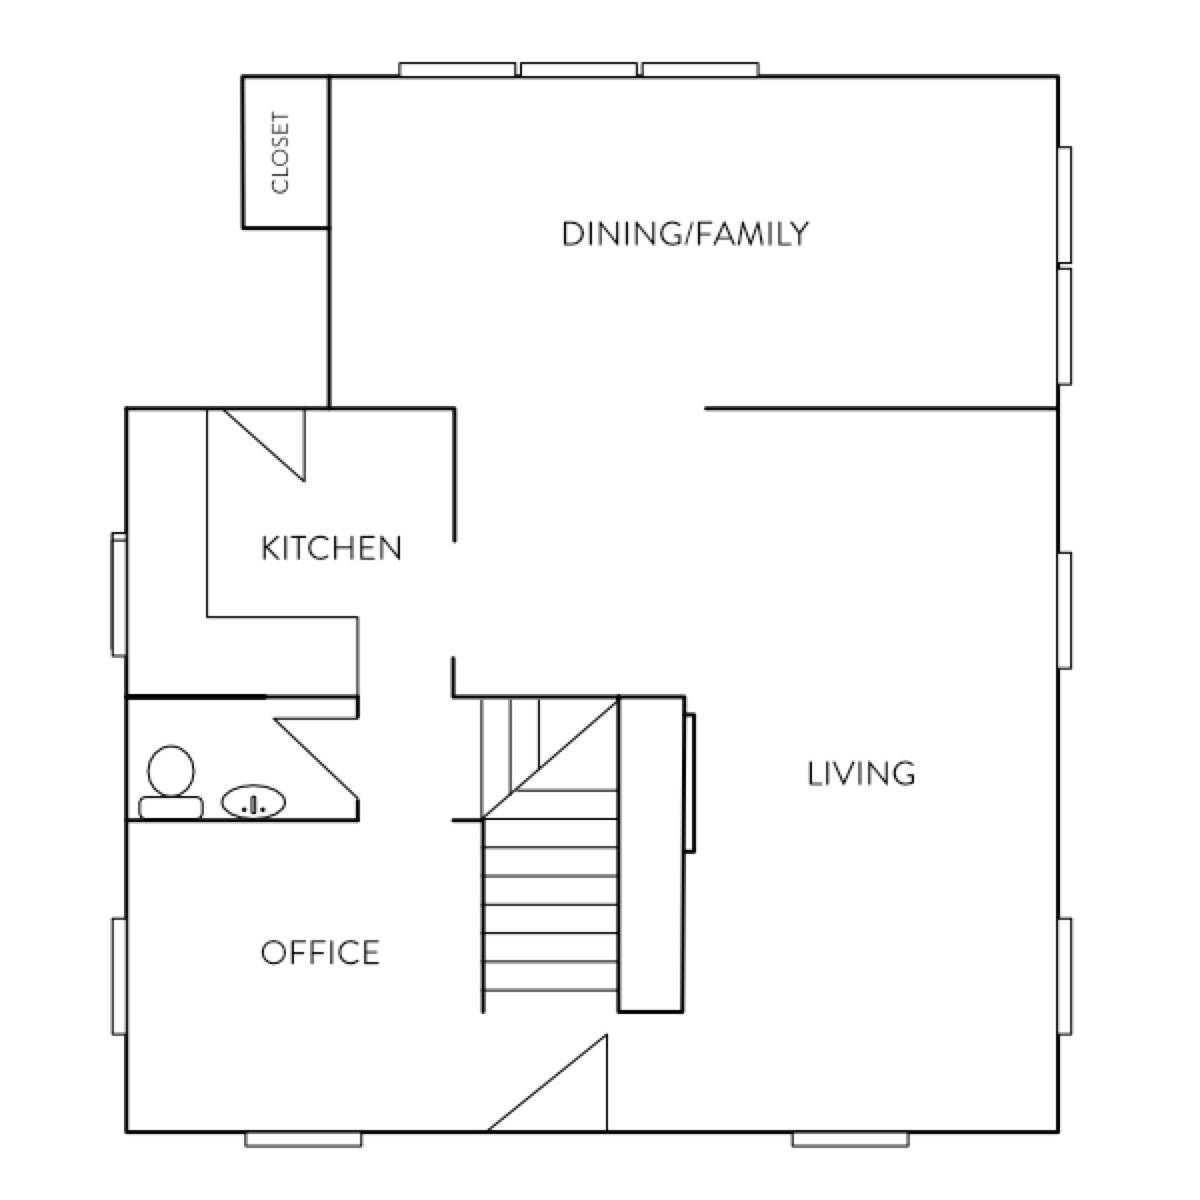 Floor plan with living, kitchen, office, dining etc.